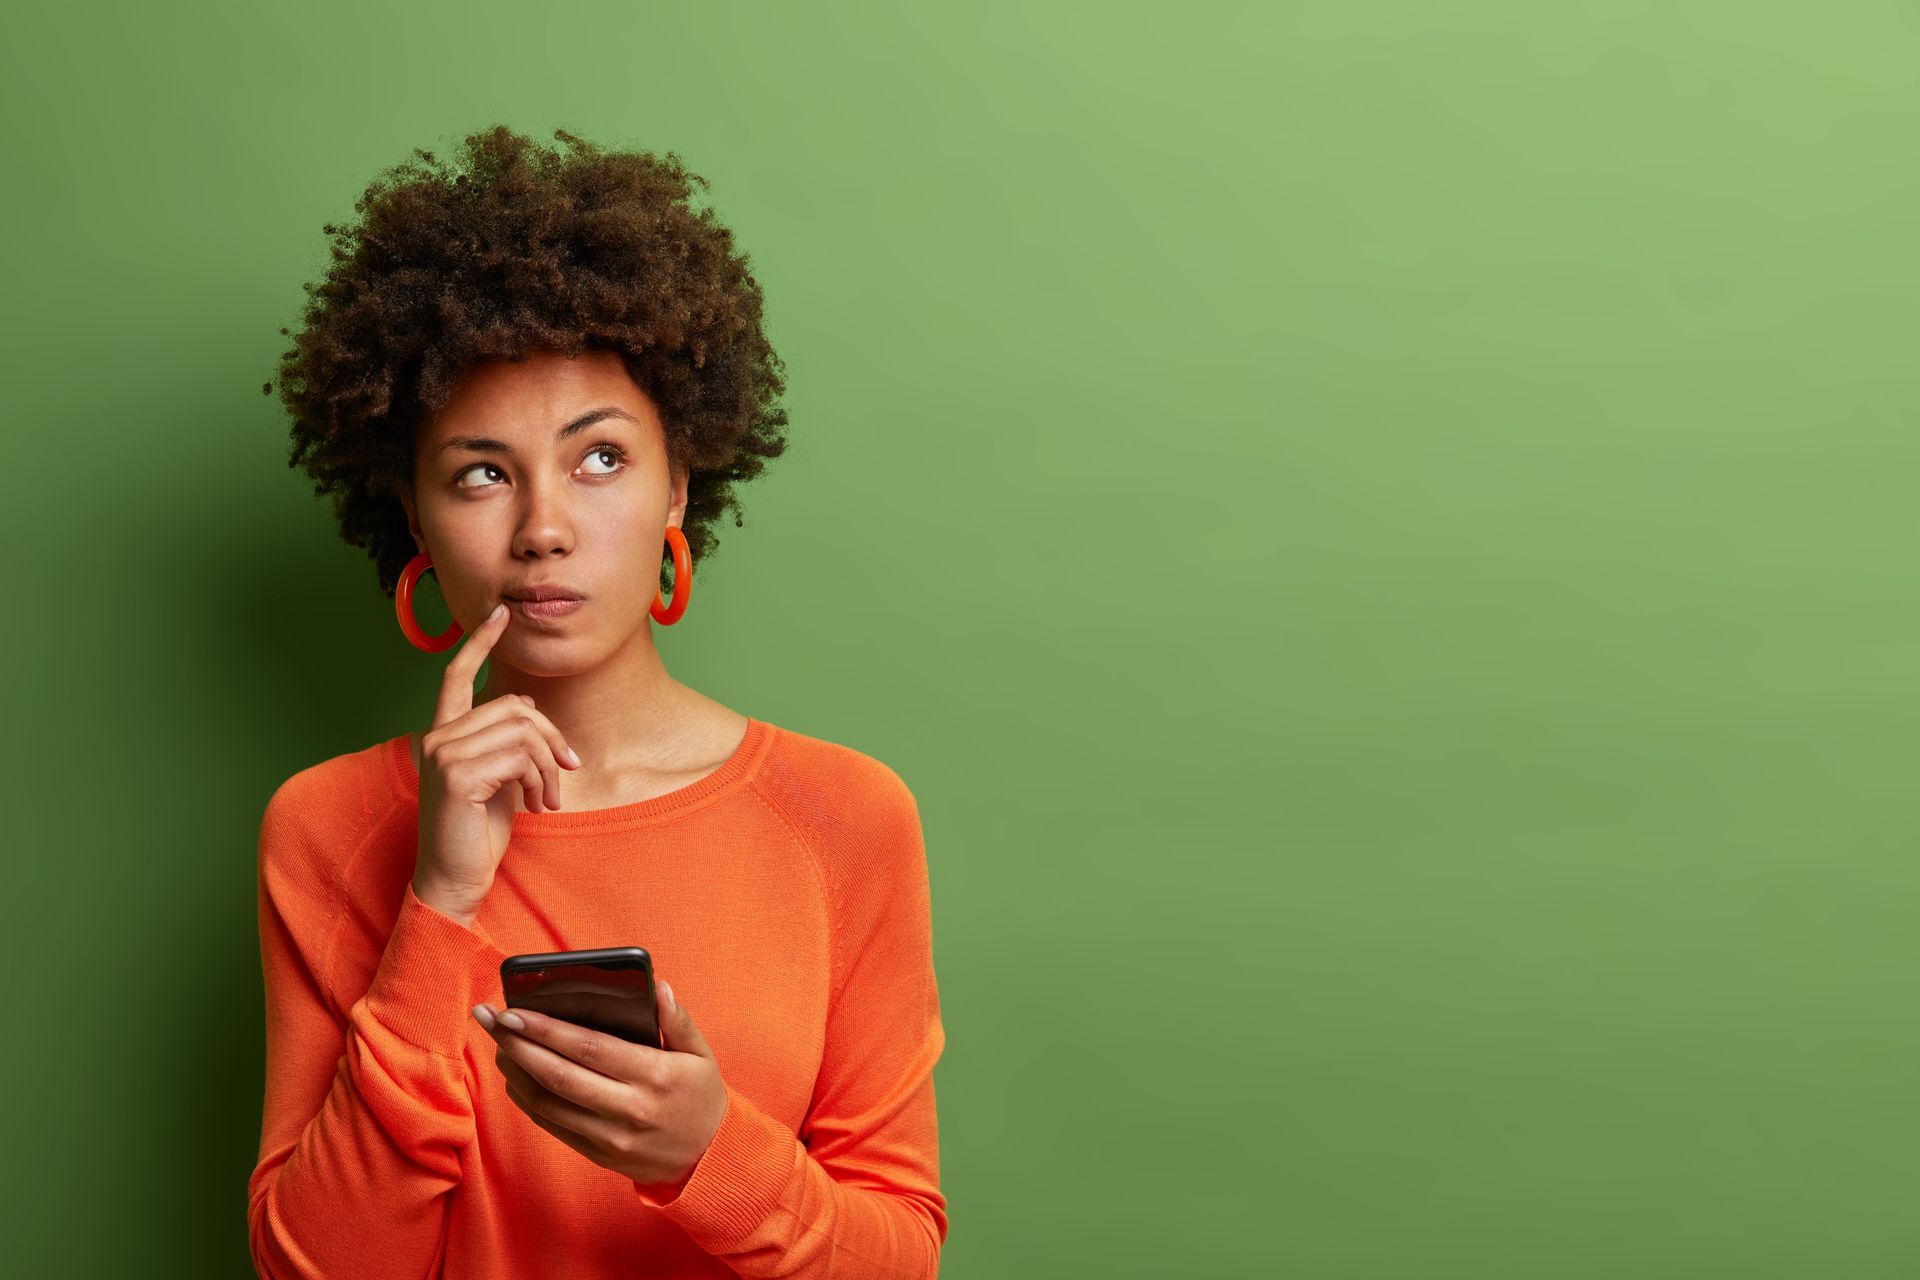 a woman in an orange sweater is holding a cell phone and looking up .